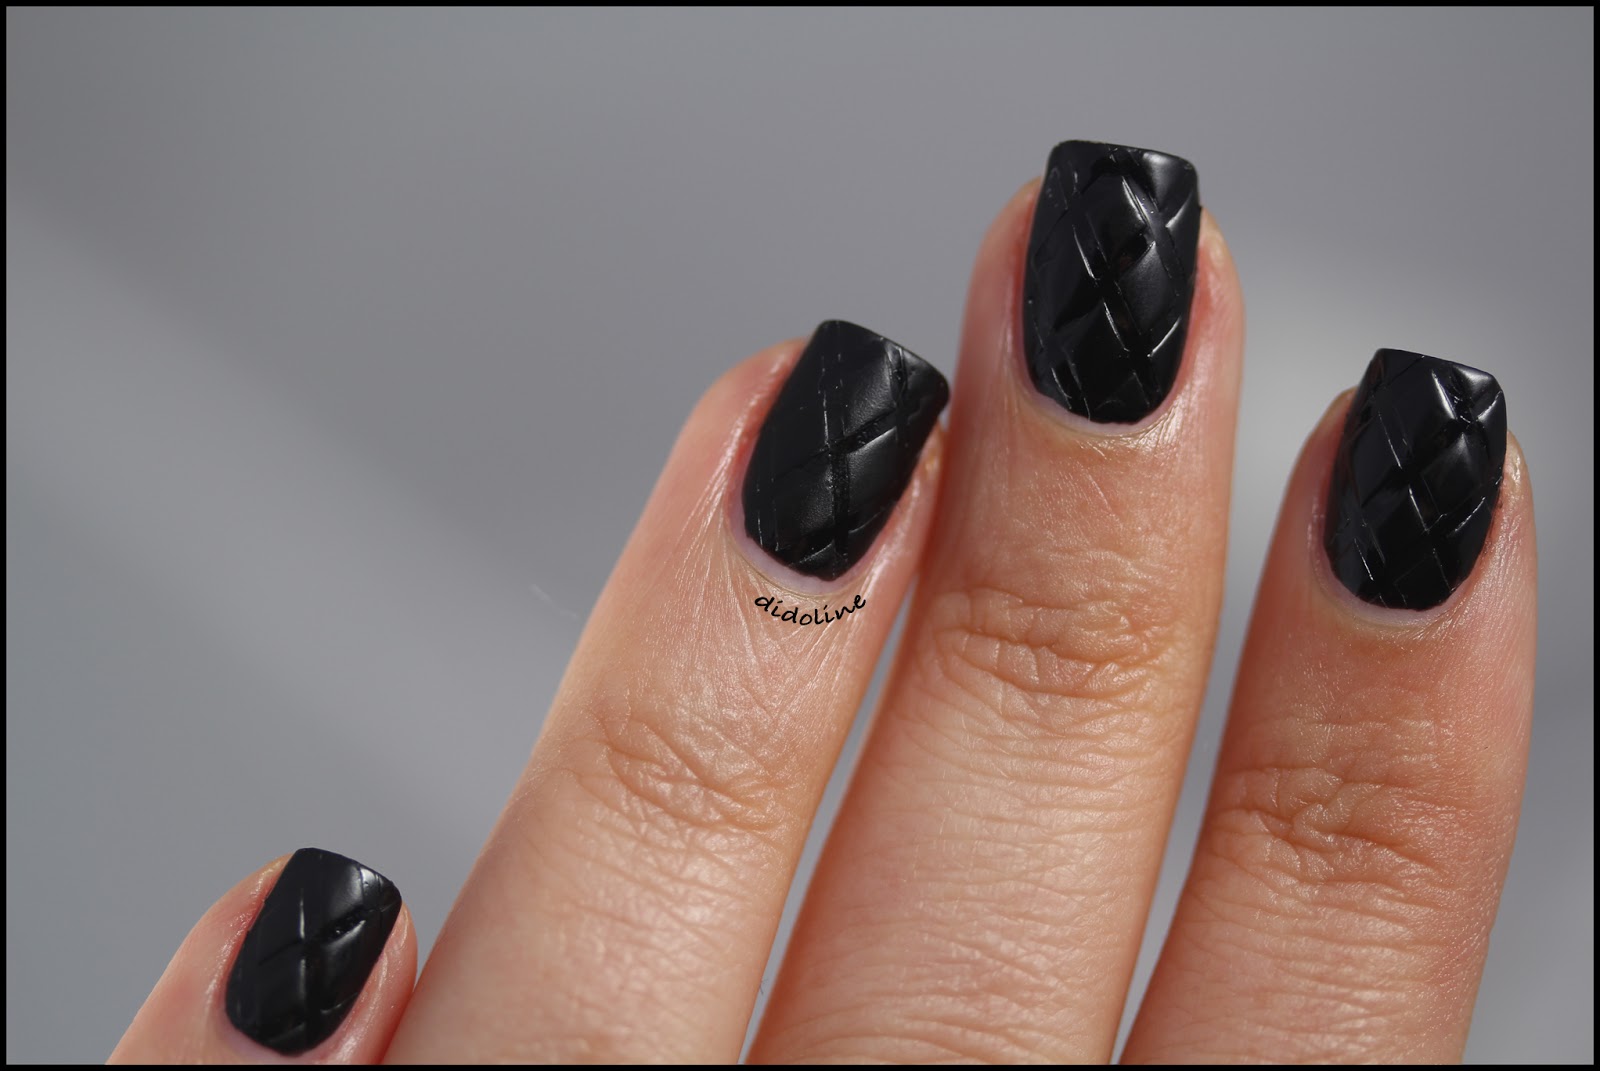 Didoline's Nails (en): Nails inspired by Revlon